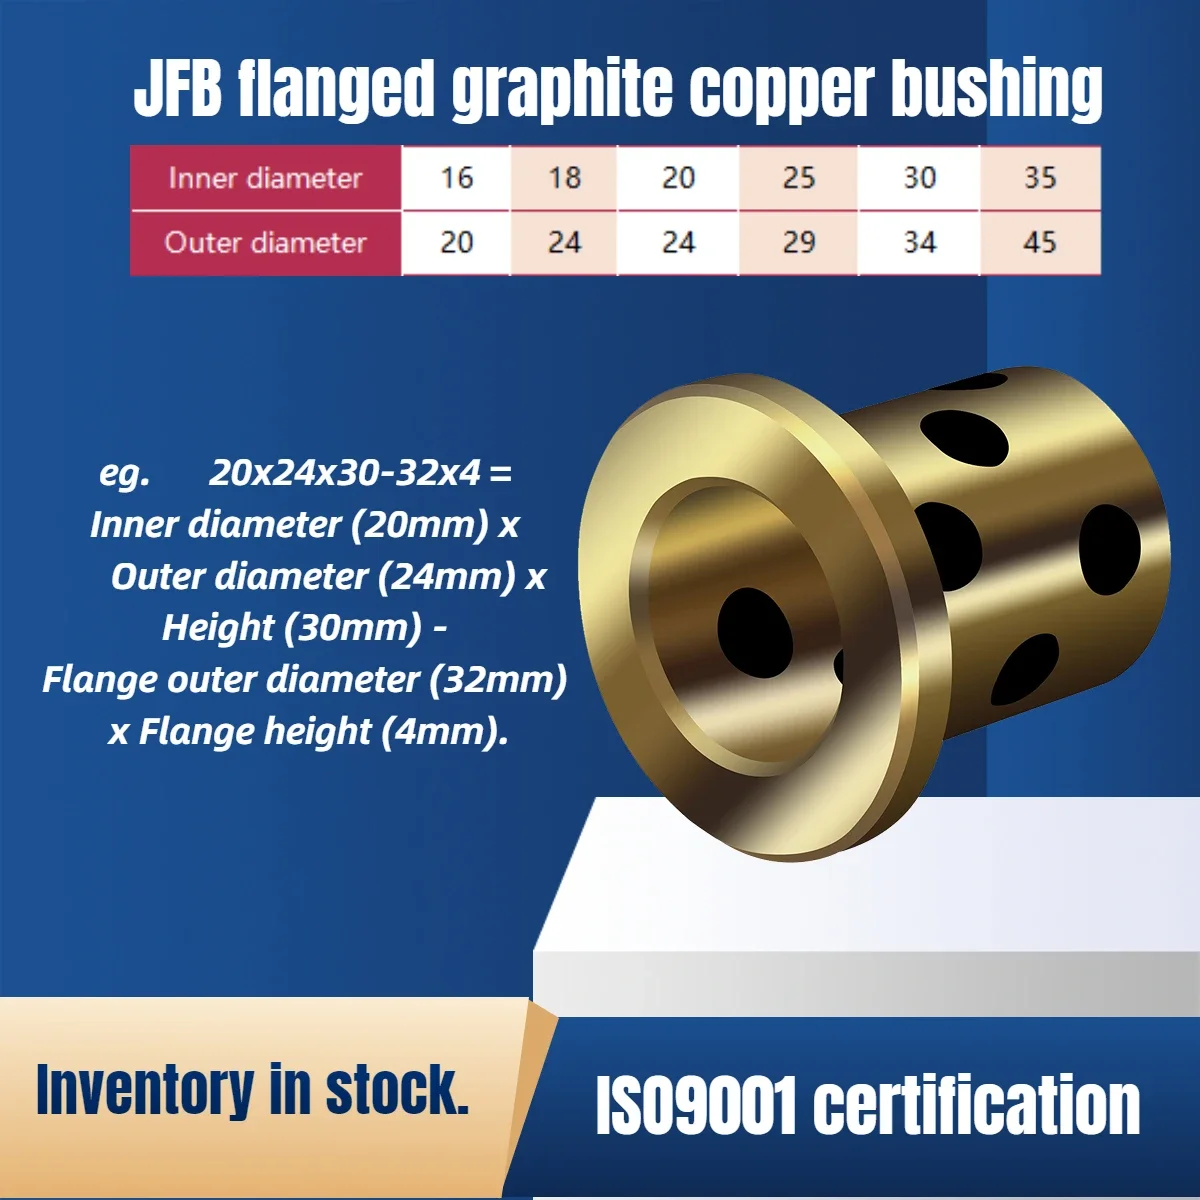 

1PC JFB Oilless Bearing,Flanged Graphite Copper Bushing Solid Lubricant,Multiple Inner Diameter Sizes (16-35mm),Wear-Resistant